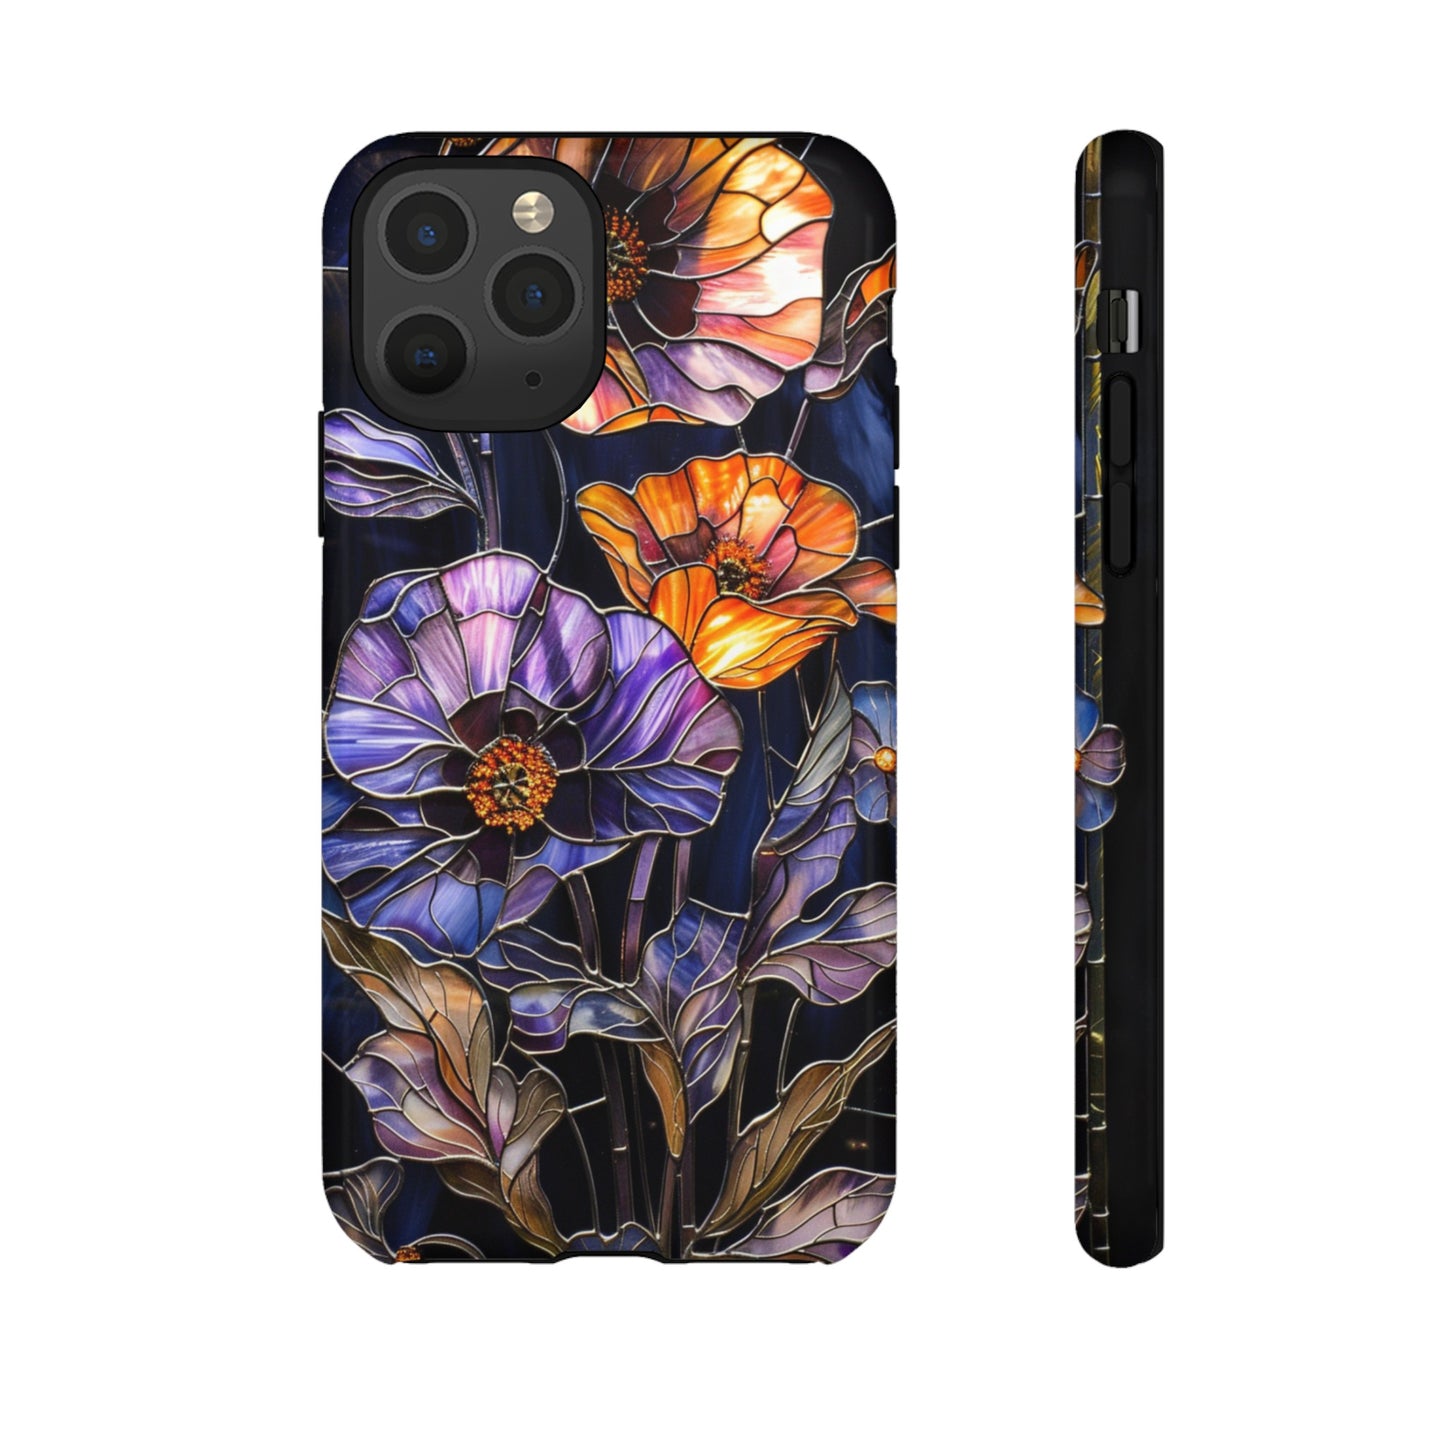 Night blossom stained glass design phone cover for iPhone 12